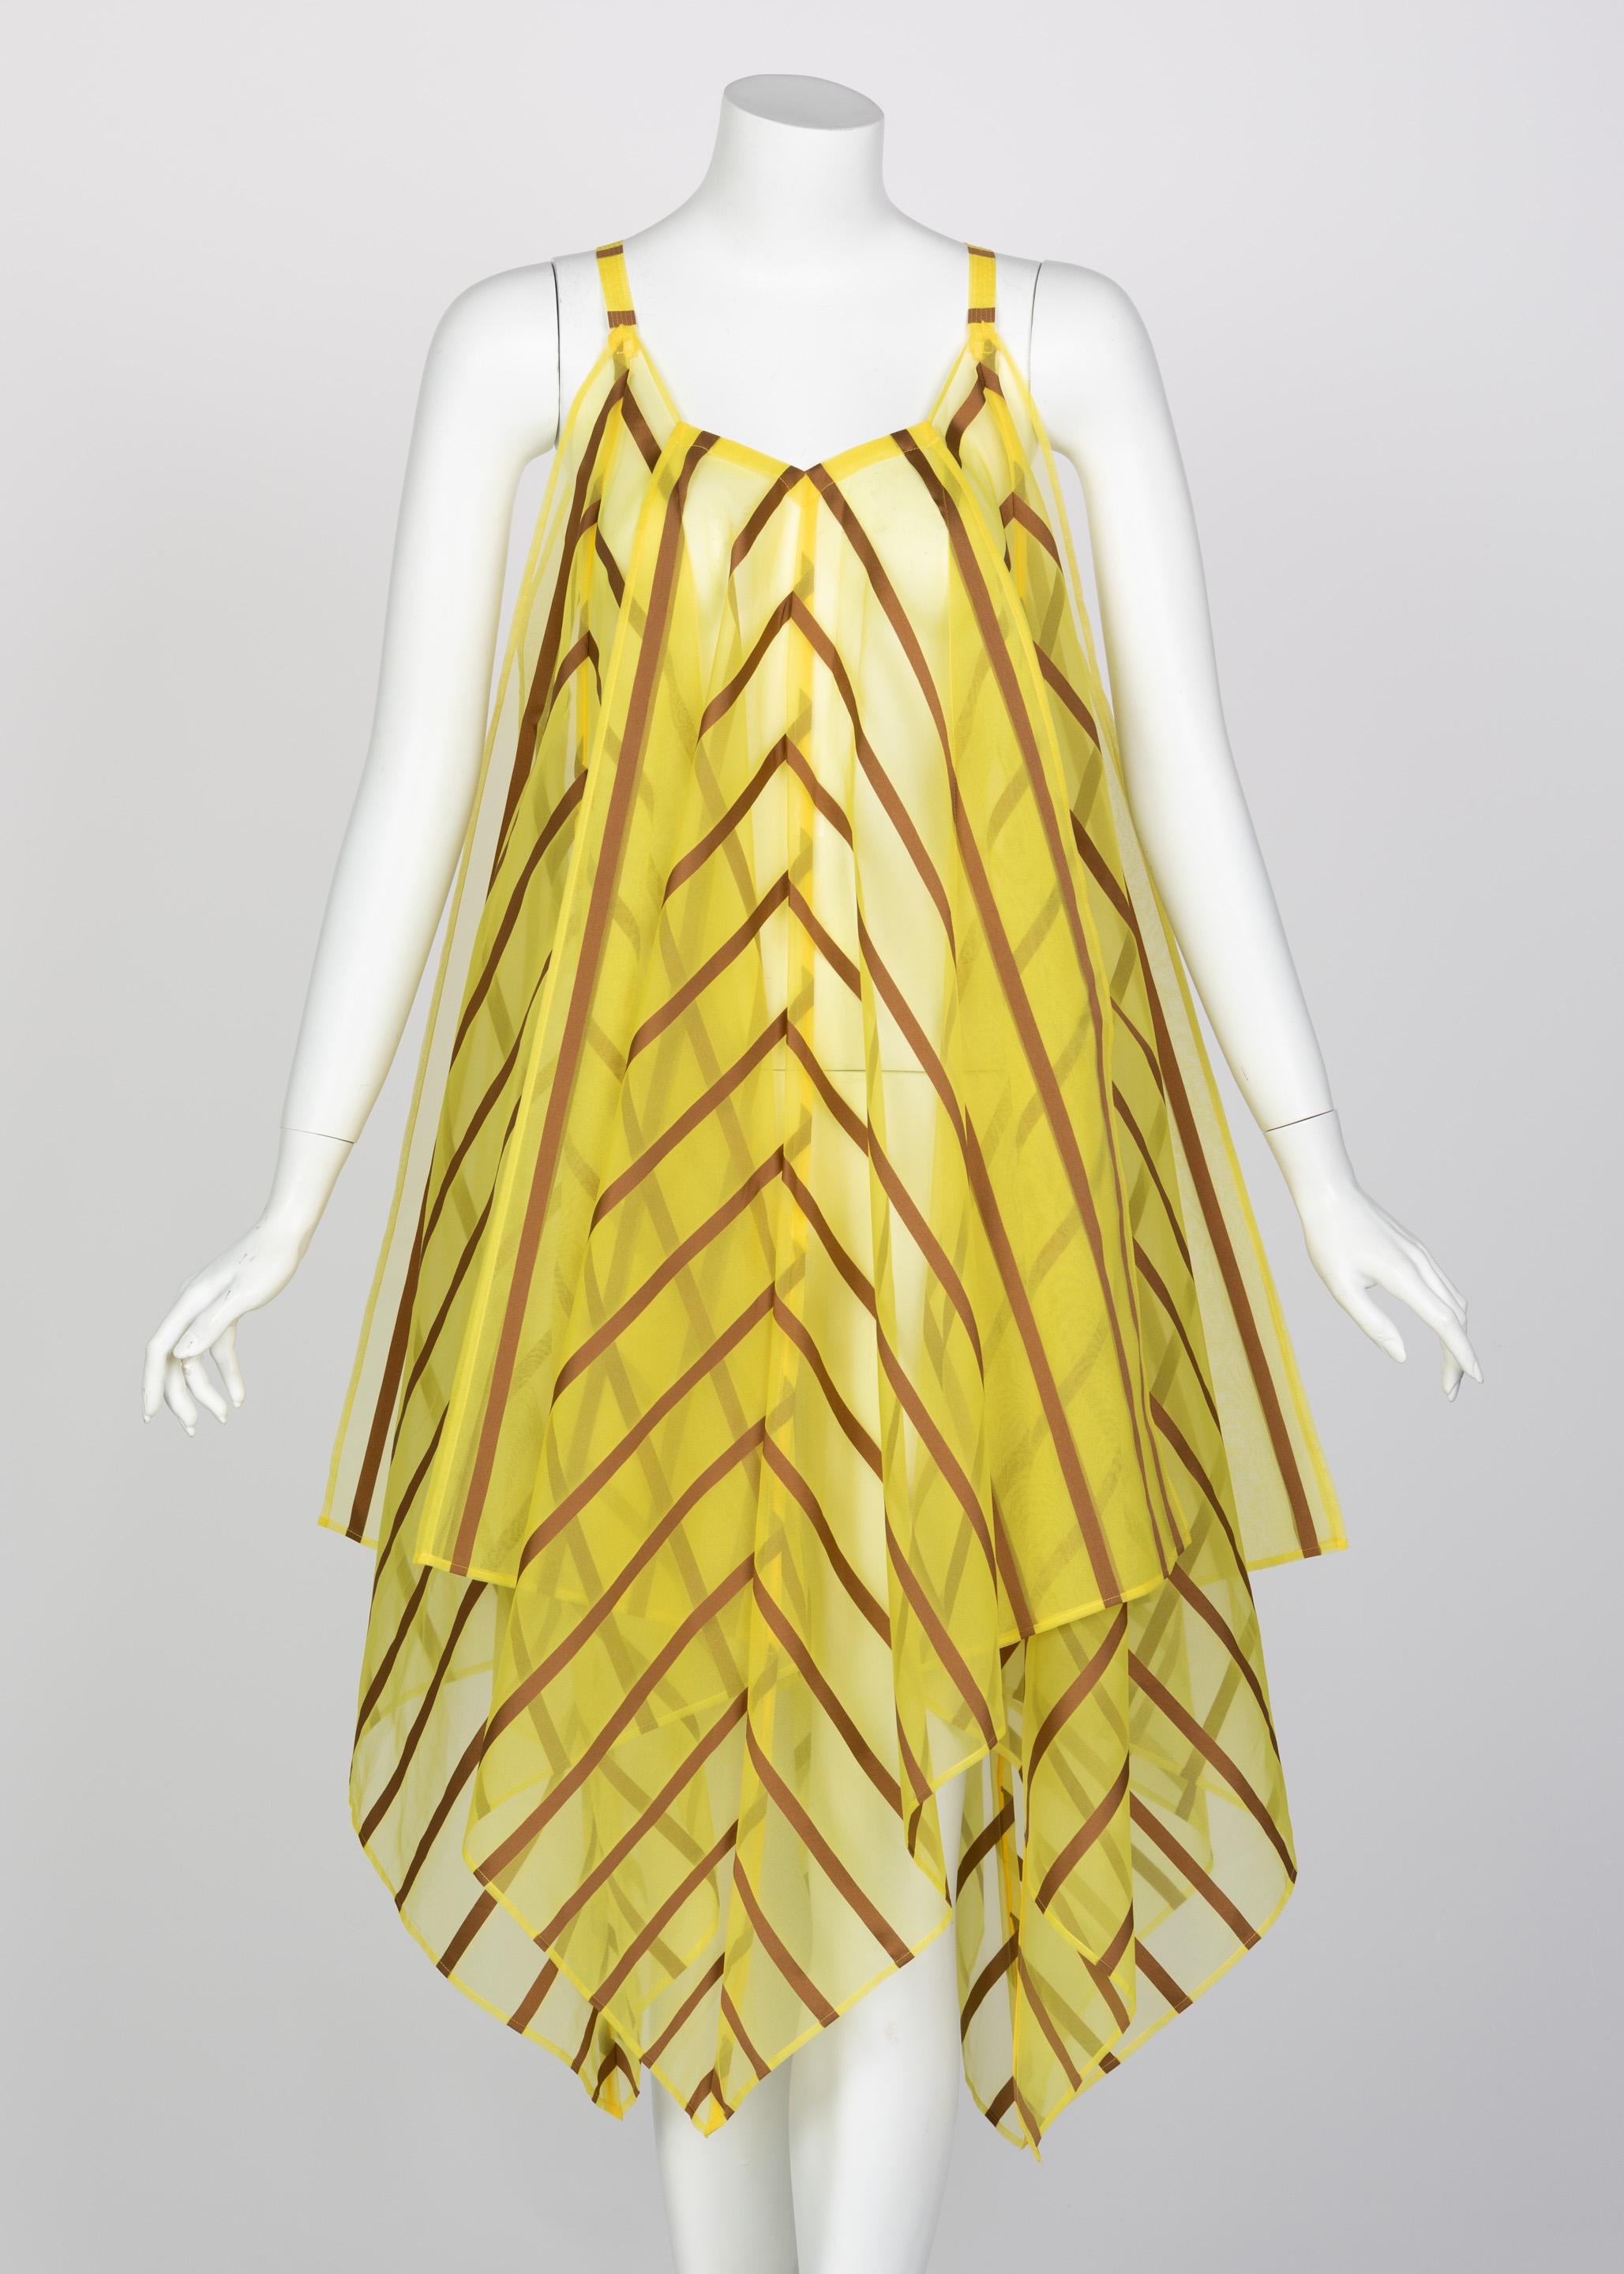 Balance. Simple features. Precision. As much as Issey Miyake is known for his architectural wonders of fashion, his designs also speak volumes through calculated simplicity. This dress is done in a vibrant, sheer yellow organza with copper stripes